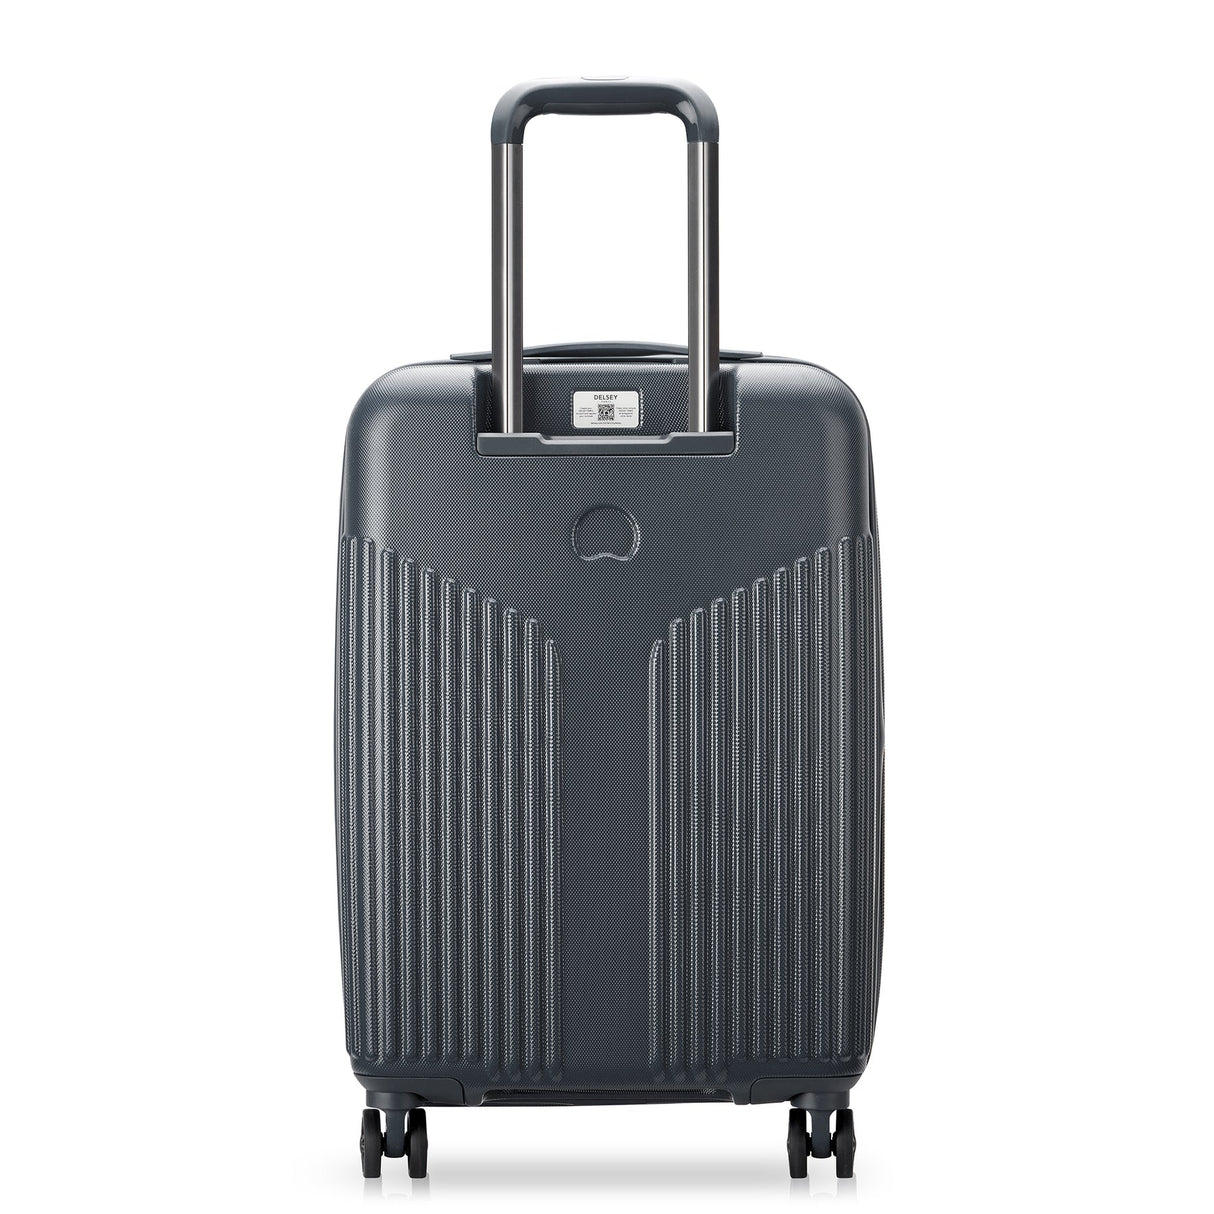 Delsey Comete 3.0 Carry-On Expandable Spinner , , delsey-comete-3.0-40387980501SI-03_1800x1800_8e1bc23d-65f5-4360-9e44-f3afea0ddef0